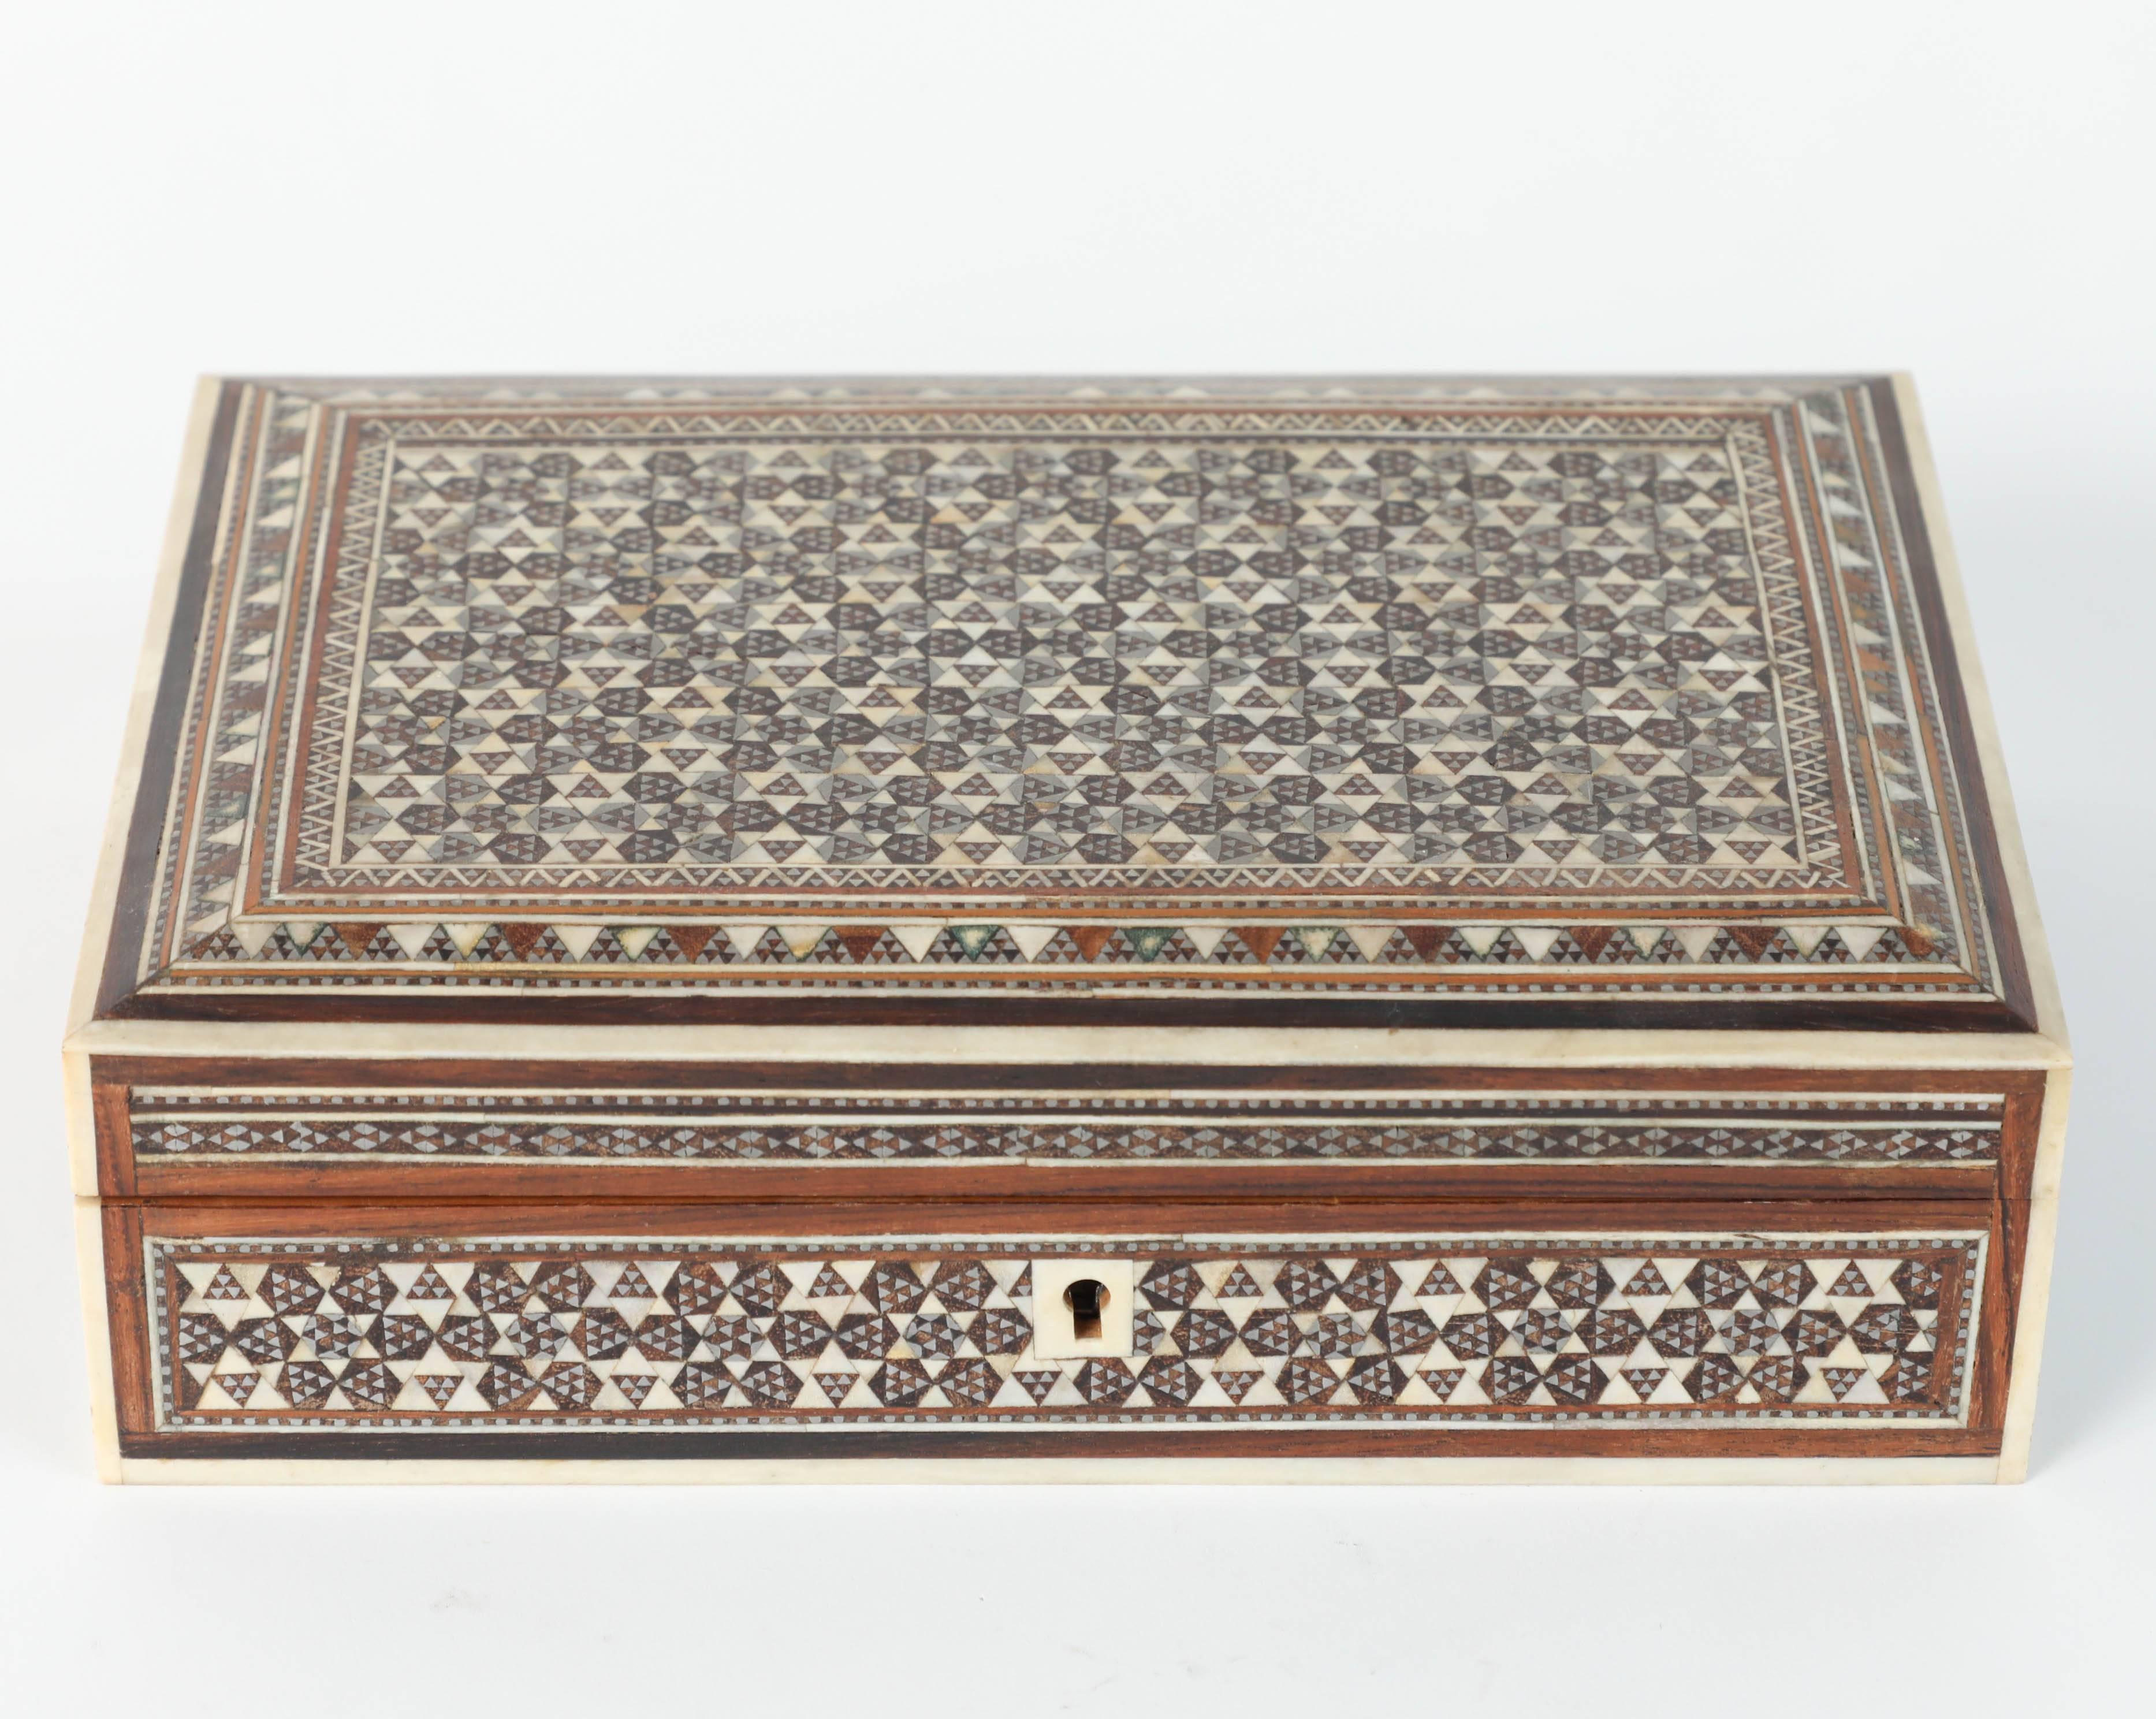 Antique Syrian wooden jewelry box inlaid with mother-of-pearl, bone and precious wood.
Middle Eastern box handcrafted in very fine Moorish micro mosaic diamonds, and a continuous hexagonal motif design intricately inlaid with bone, mother-of-pearl,